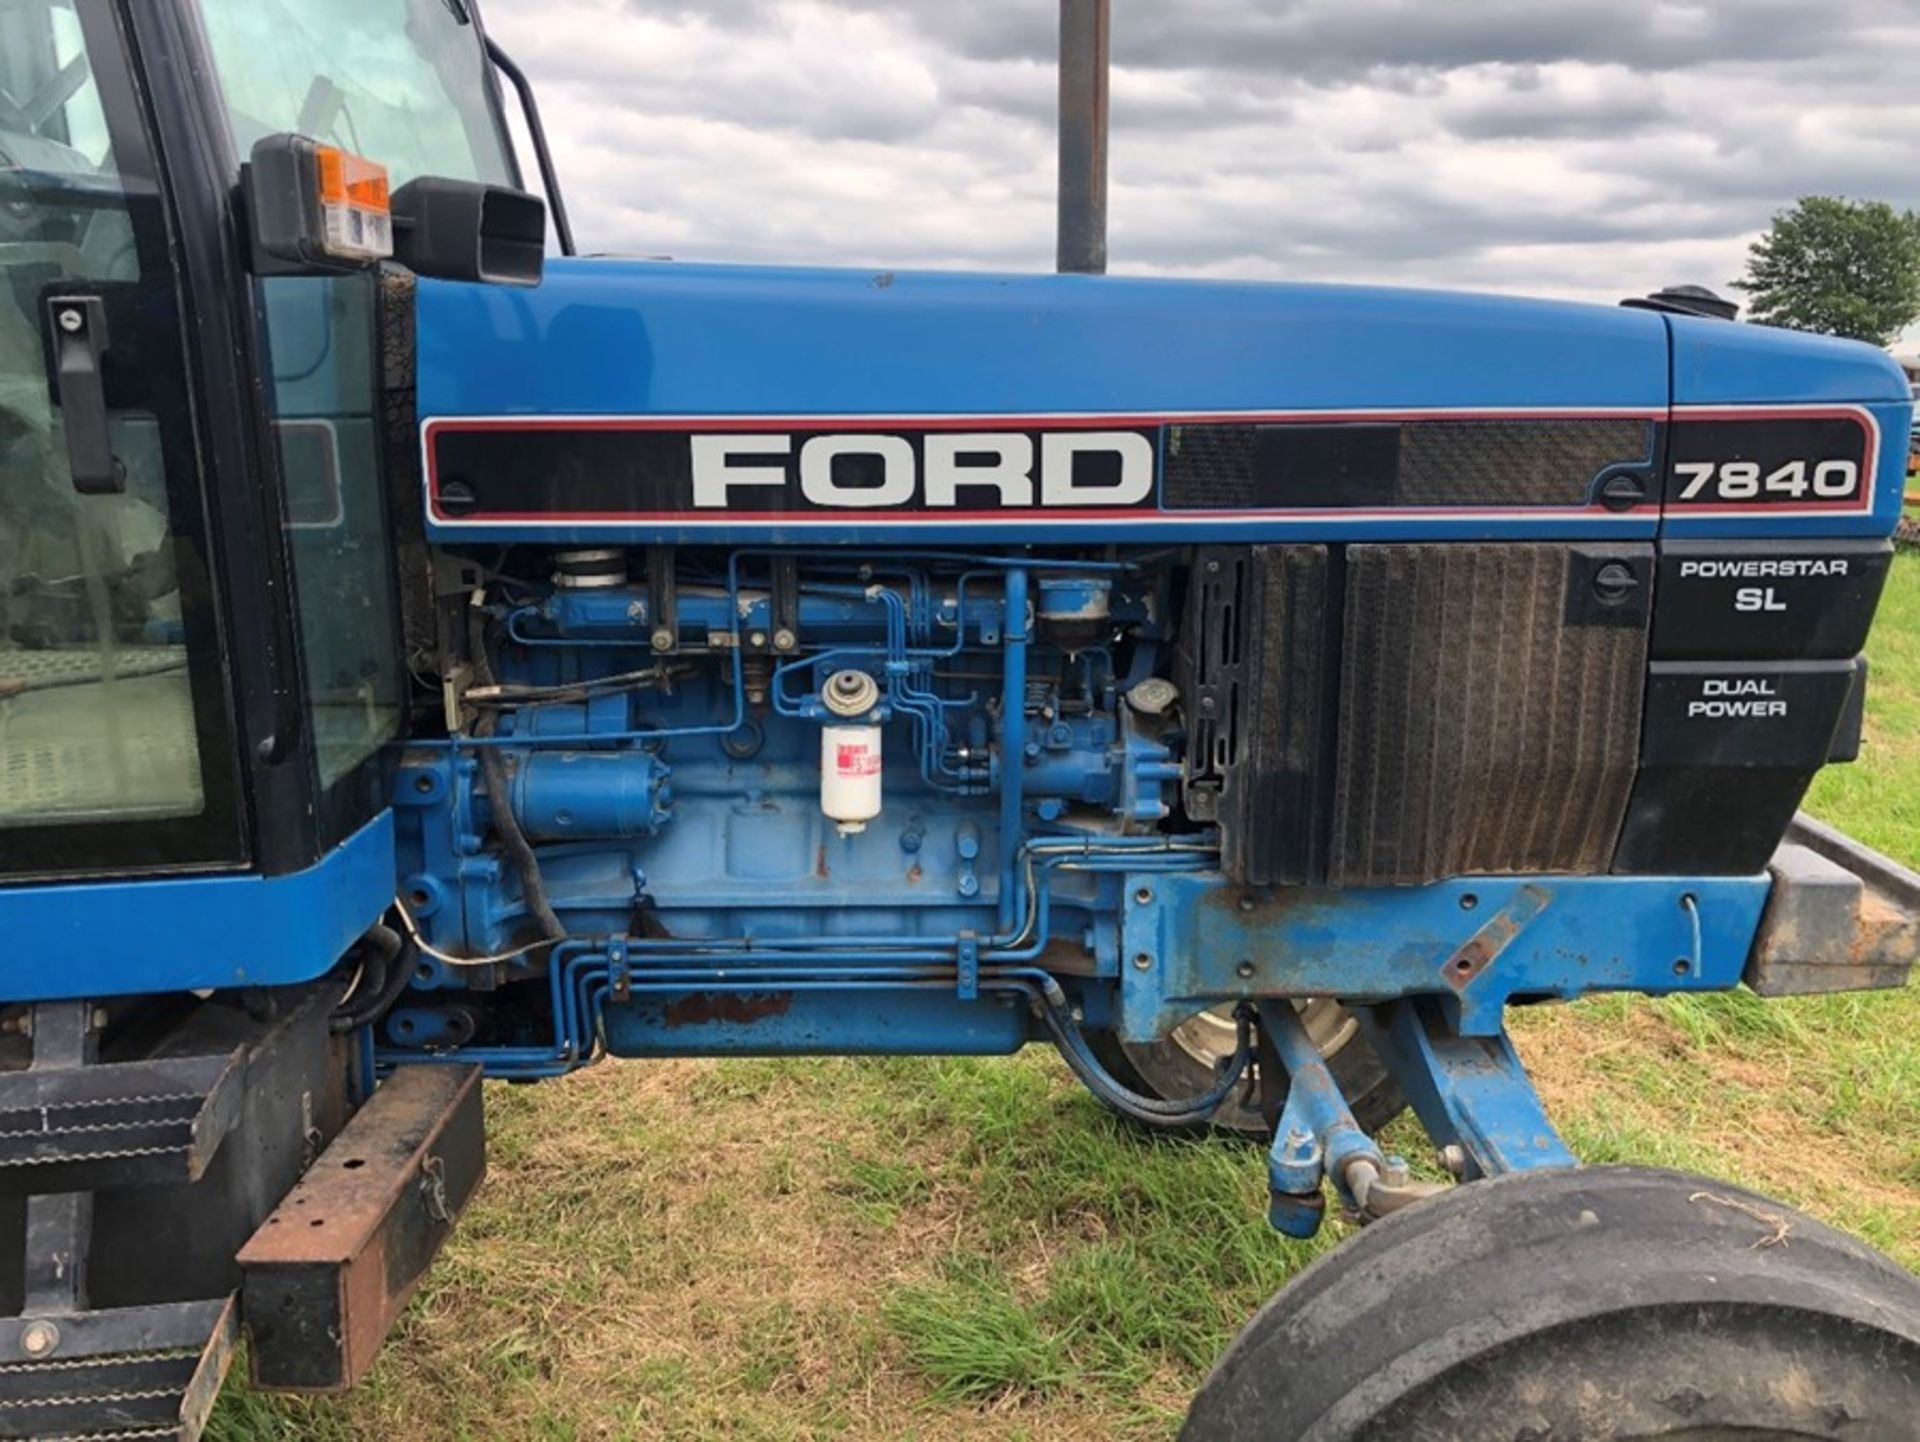 (94) Ford 7840 Powerstar SL 2wd tractor, 4,551 hours, dual power. air con, Reg L56 UVL, Rear 13.6 - Image 2 of 11